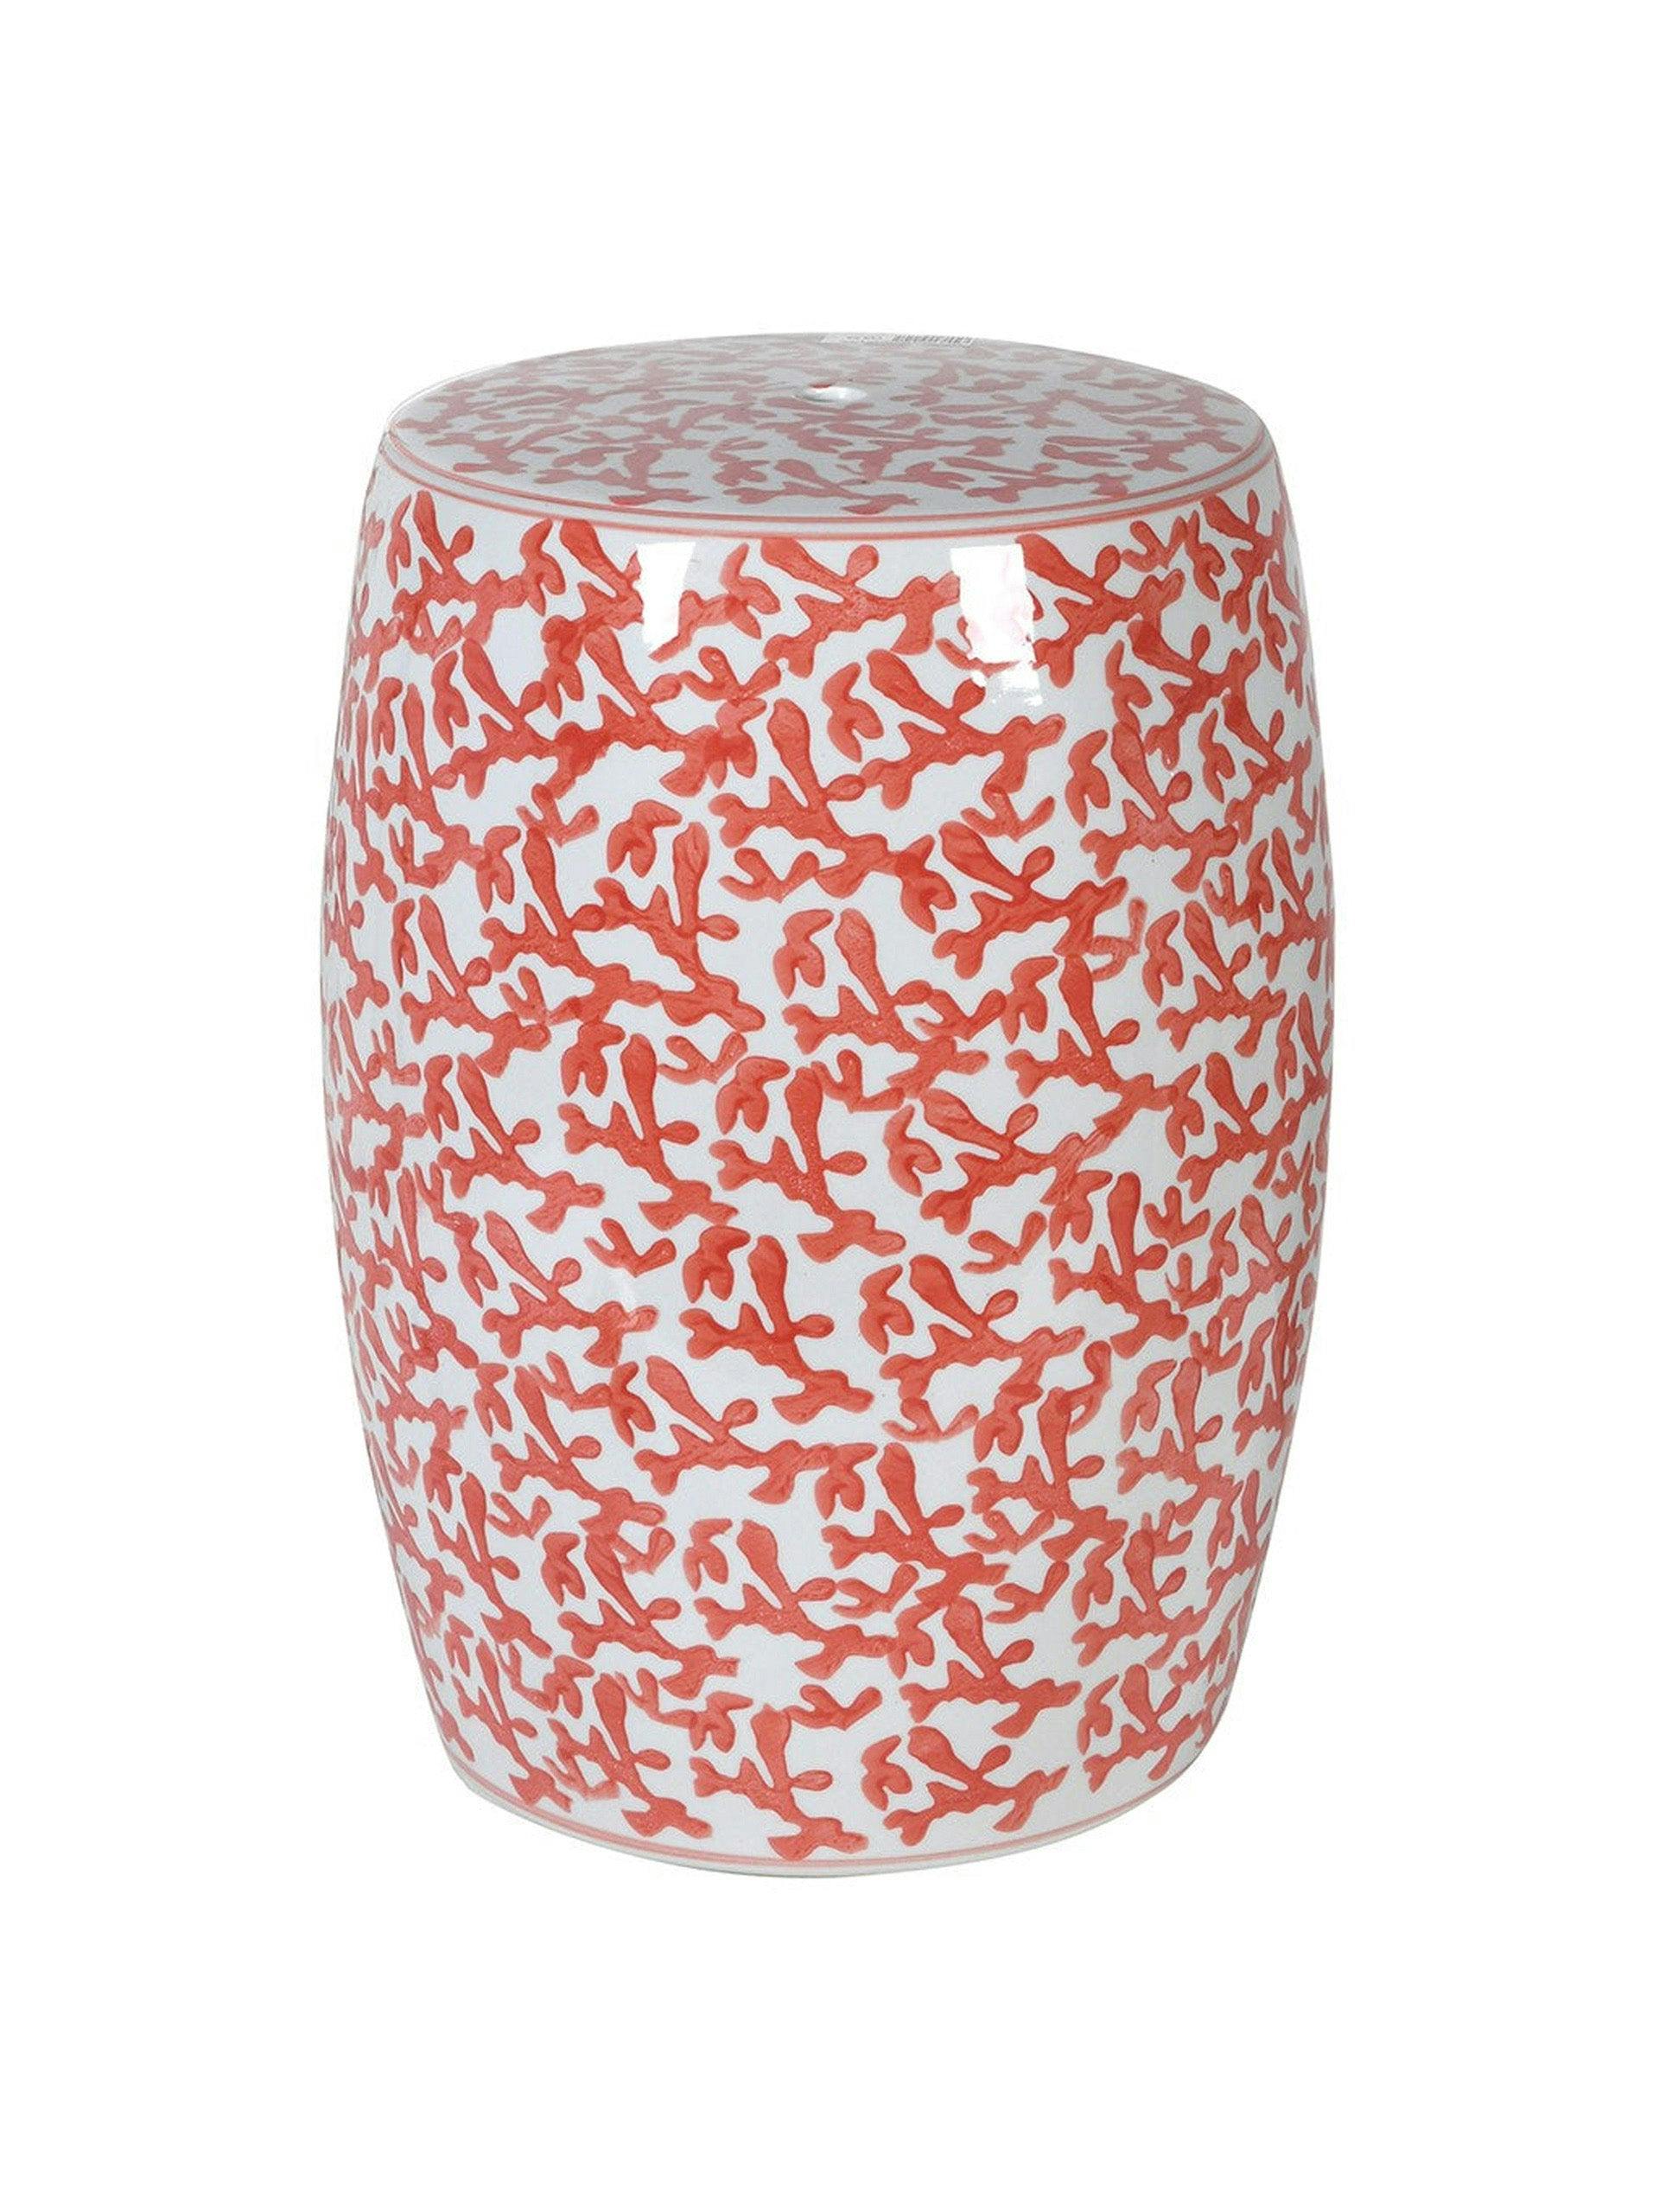 Sienna porcelain stool with hand painted detail